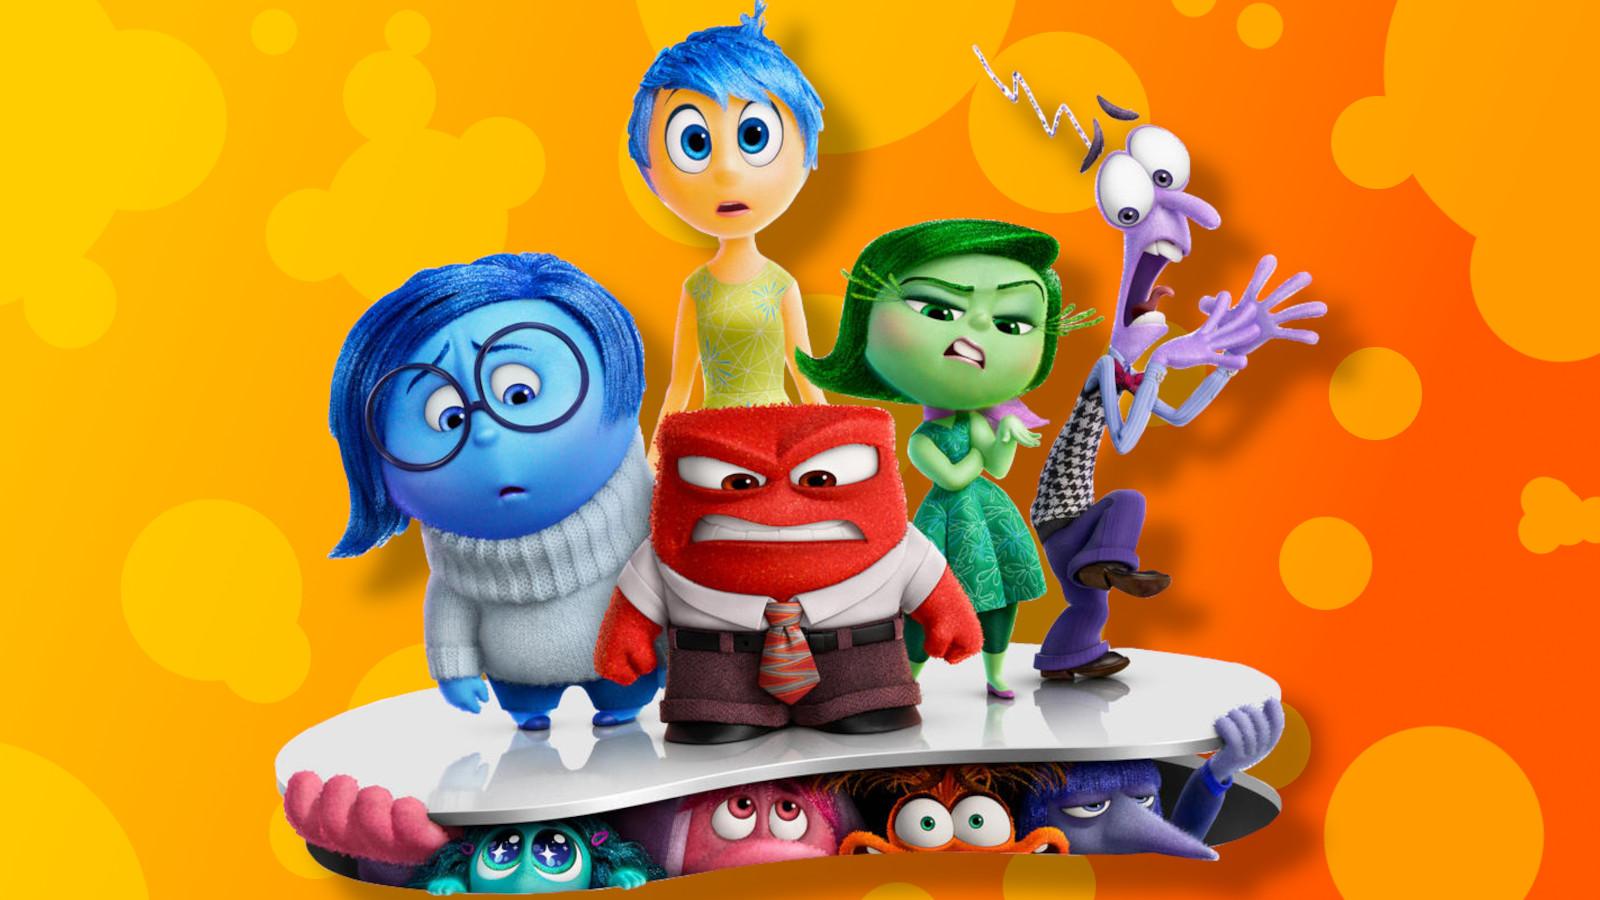 Joy, Sadness, Fear, Disgust, Anger and the new emotions from Inside Out 2.